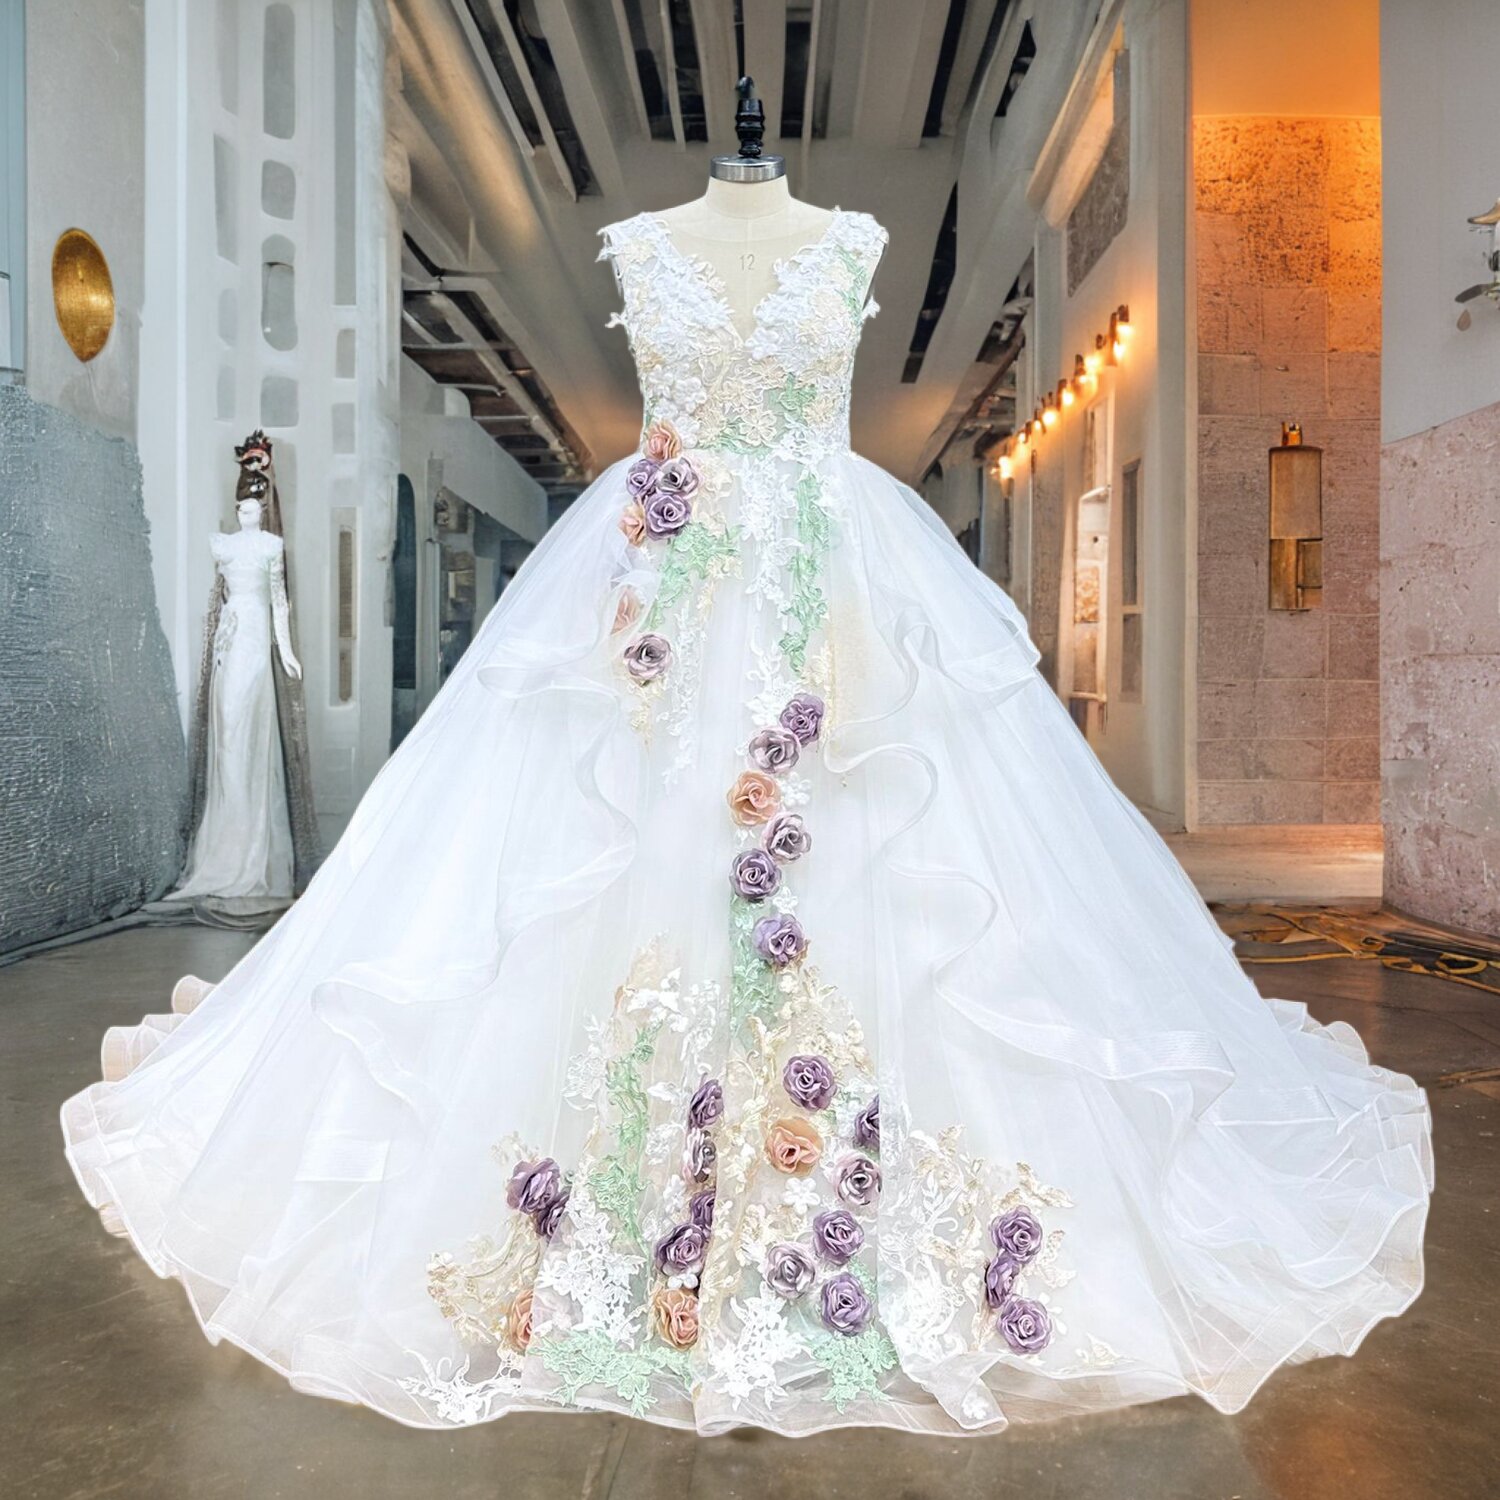 Hire Lnyer Colorful Appliques Man Hand Flowers Princess Ball Gown Wedding Dresses With Ruffles Skirt Real Office Photos Video